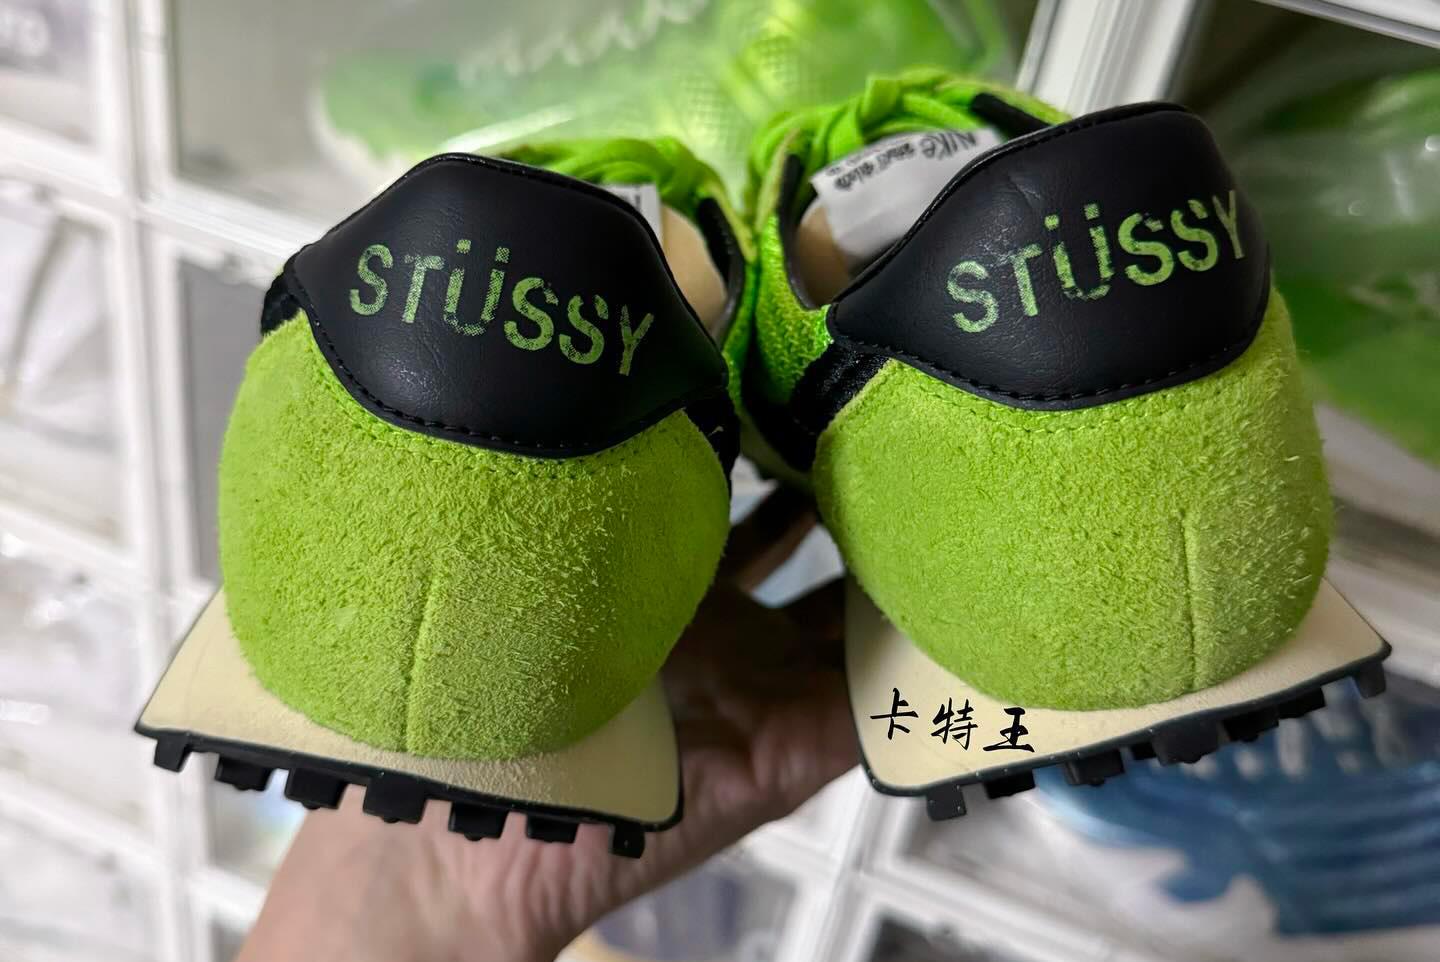 Stussy Nike LD 1000 Sneakers Neon Green Collaboration